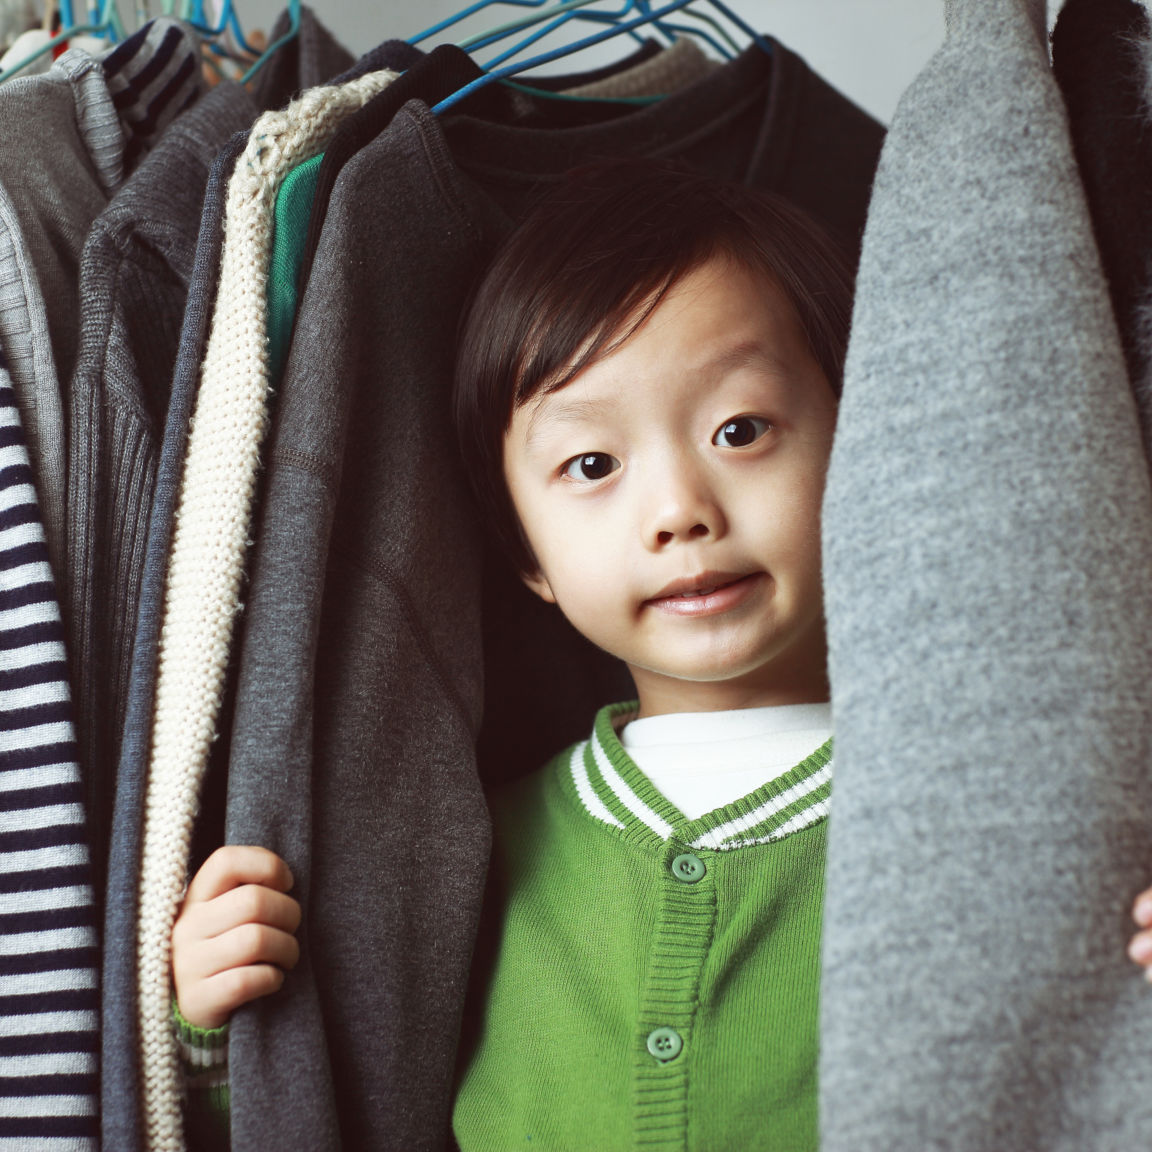 Child playing in the closet 529073338 3869x2579